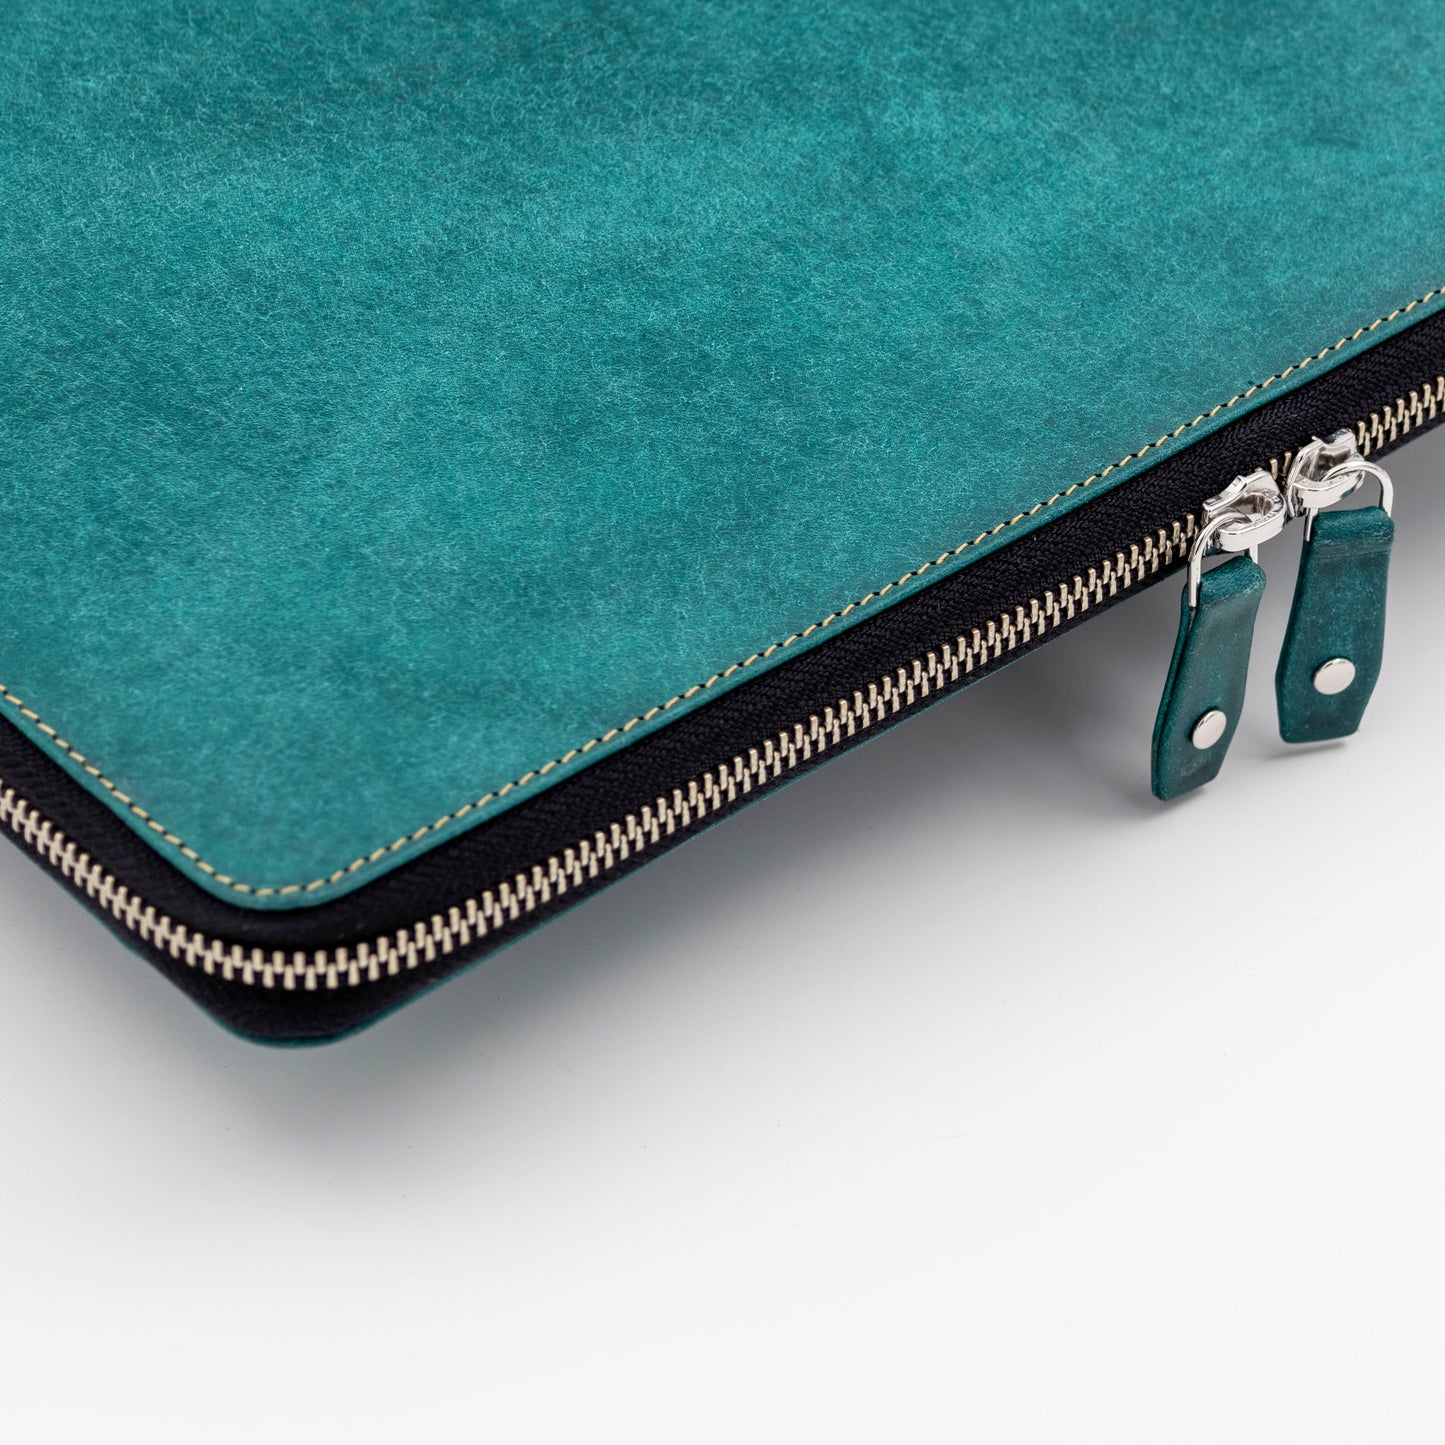 The leather laptop case is designed with a zip around closure. 